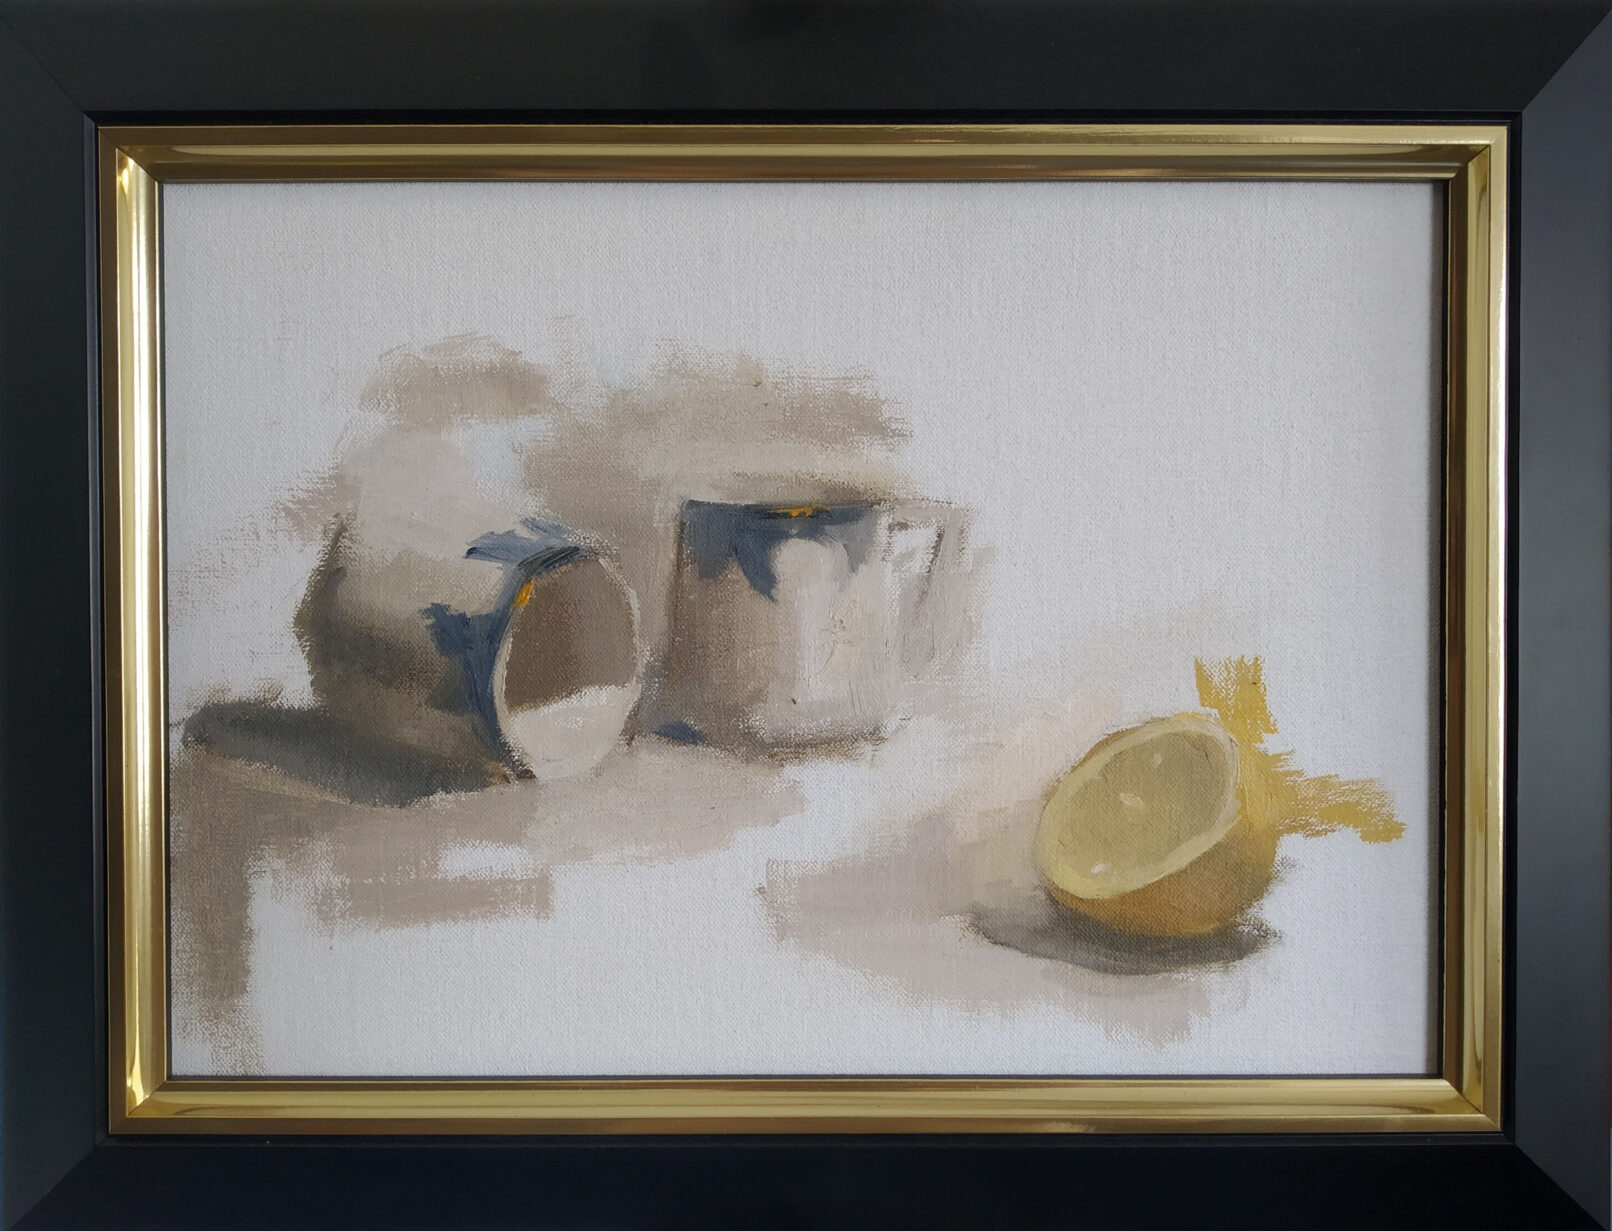 two cups one tipped over and hald a lemon slice, oil painting